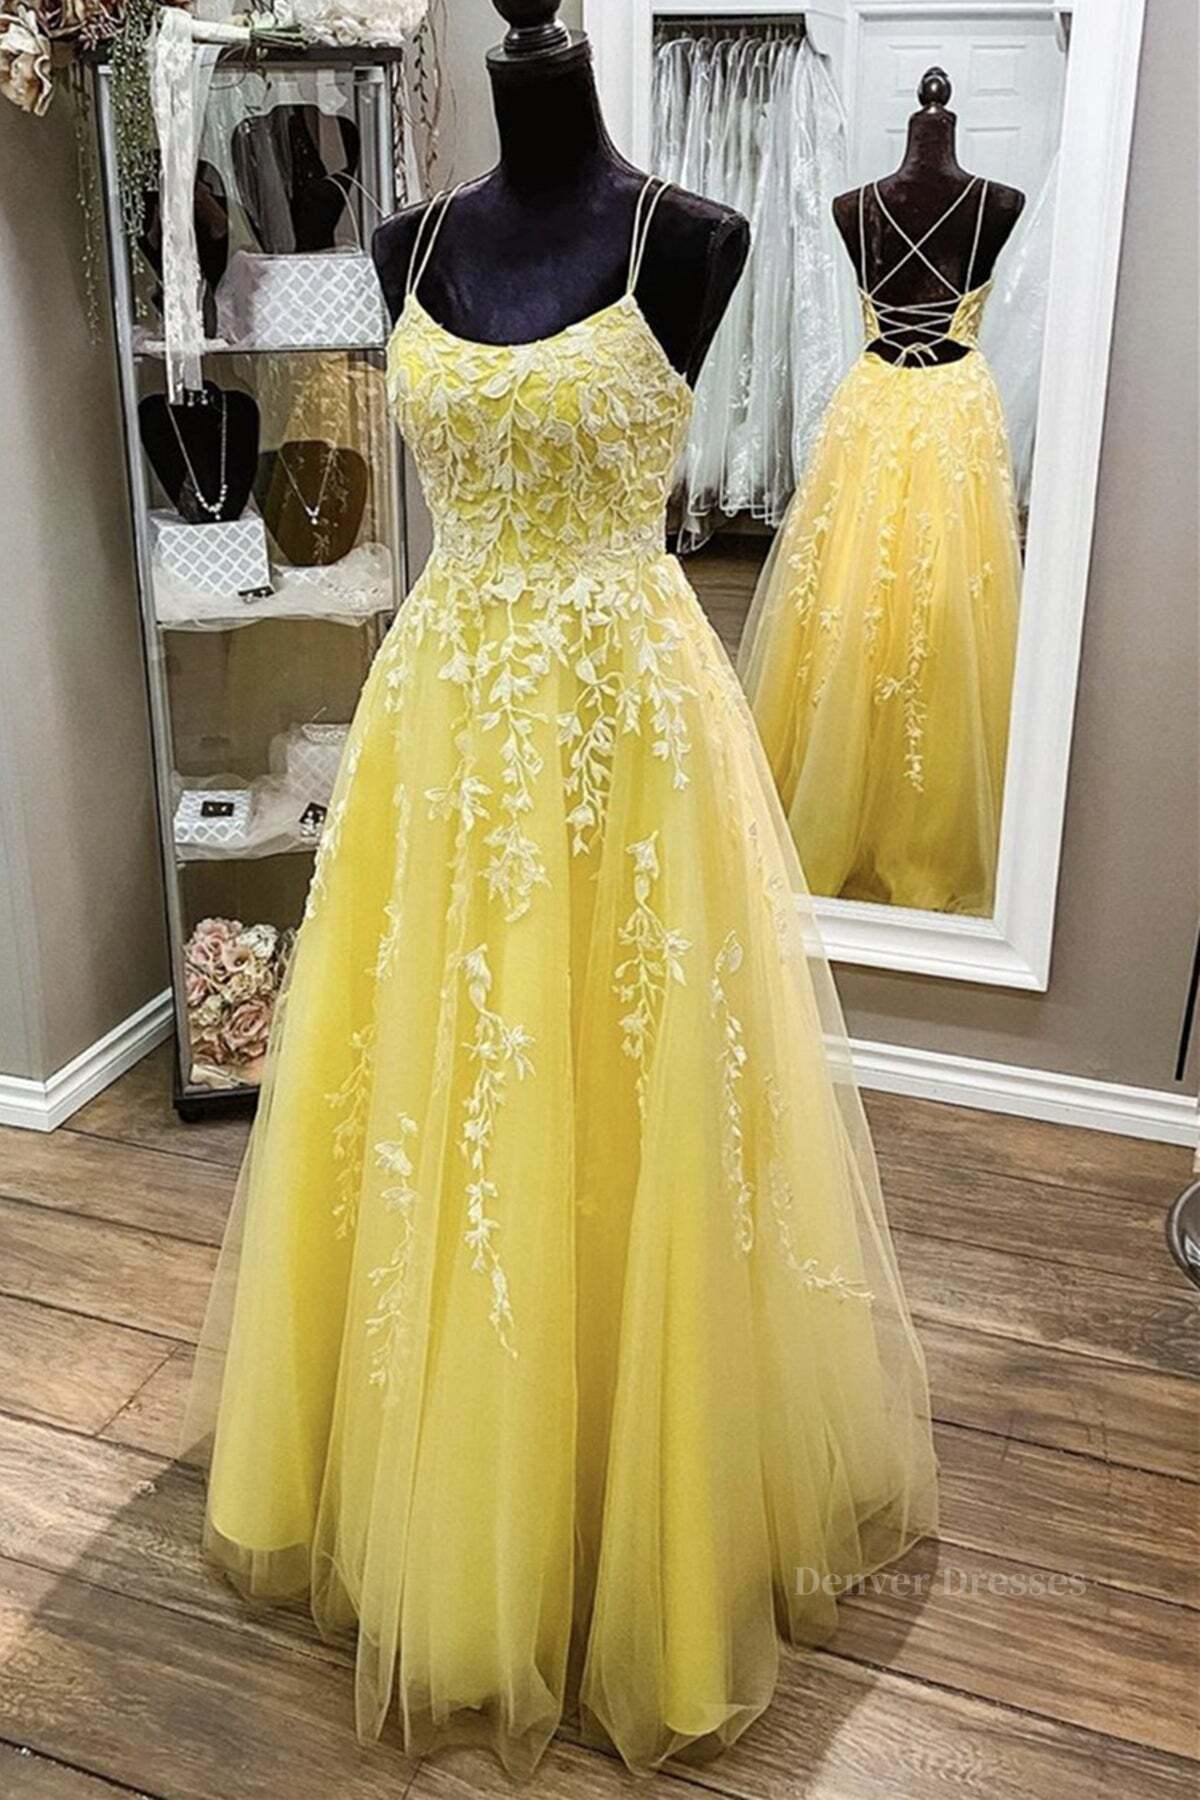 Semi Formal Outfit, Yellow Lace Backless A Line Long Prom Dress Open Back Formal Dress Yellow Evening Dress